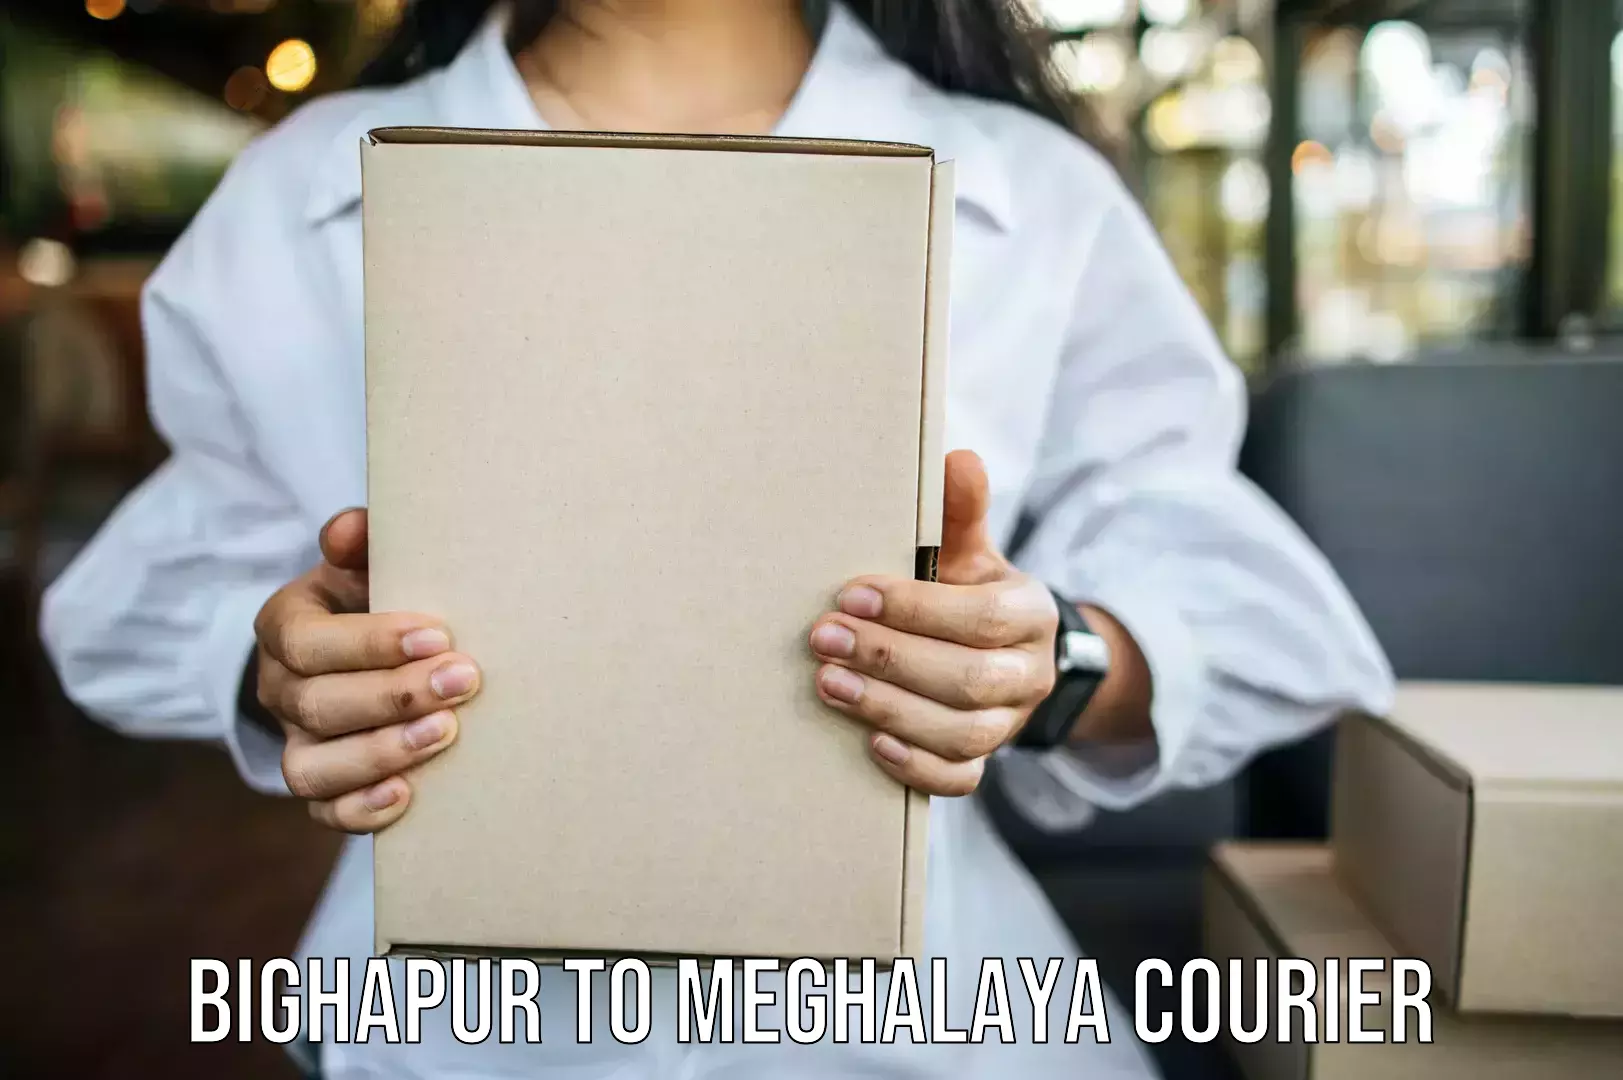 Furniture relocation experts Bighapur to Nongpoh